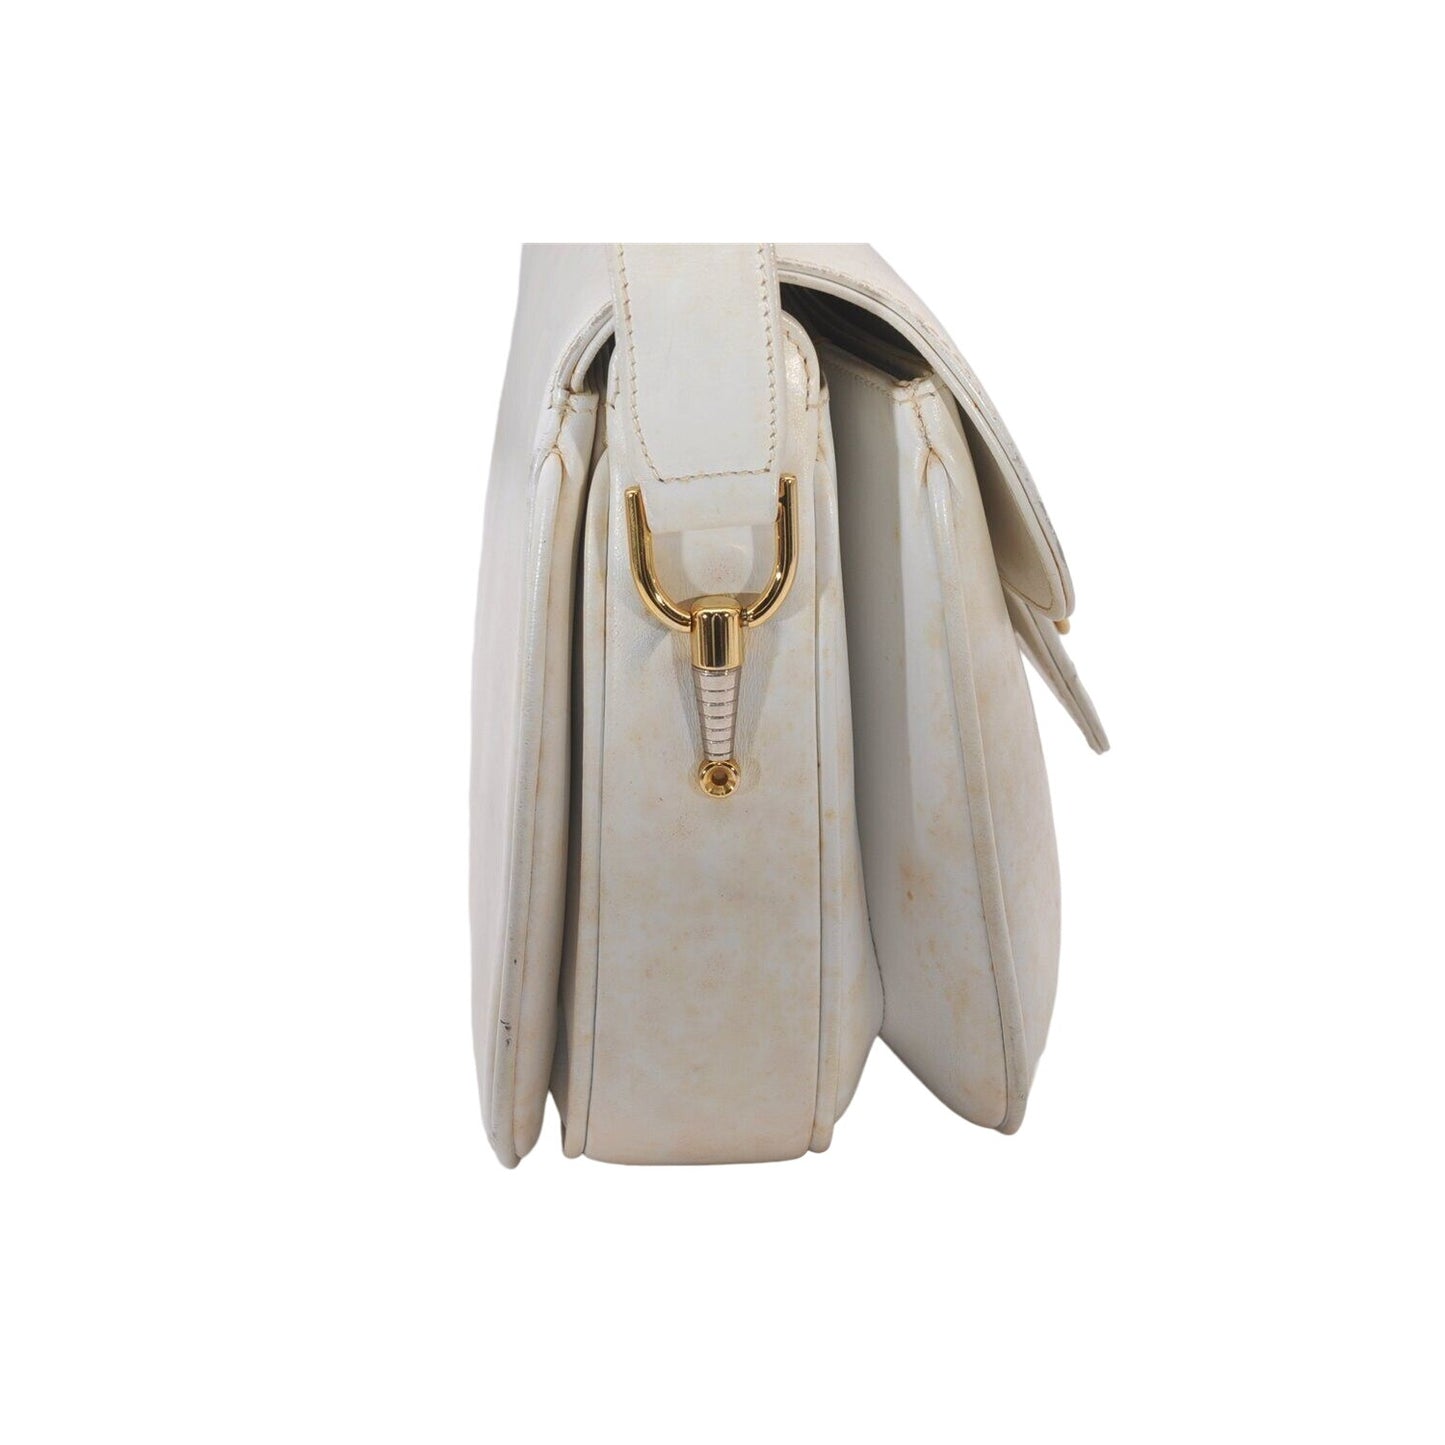 Gucci Ivory Leather 1955 Horse-bit Shoulder bag with two-tone hardware